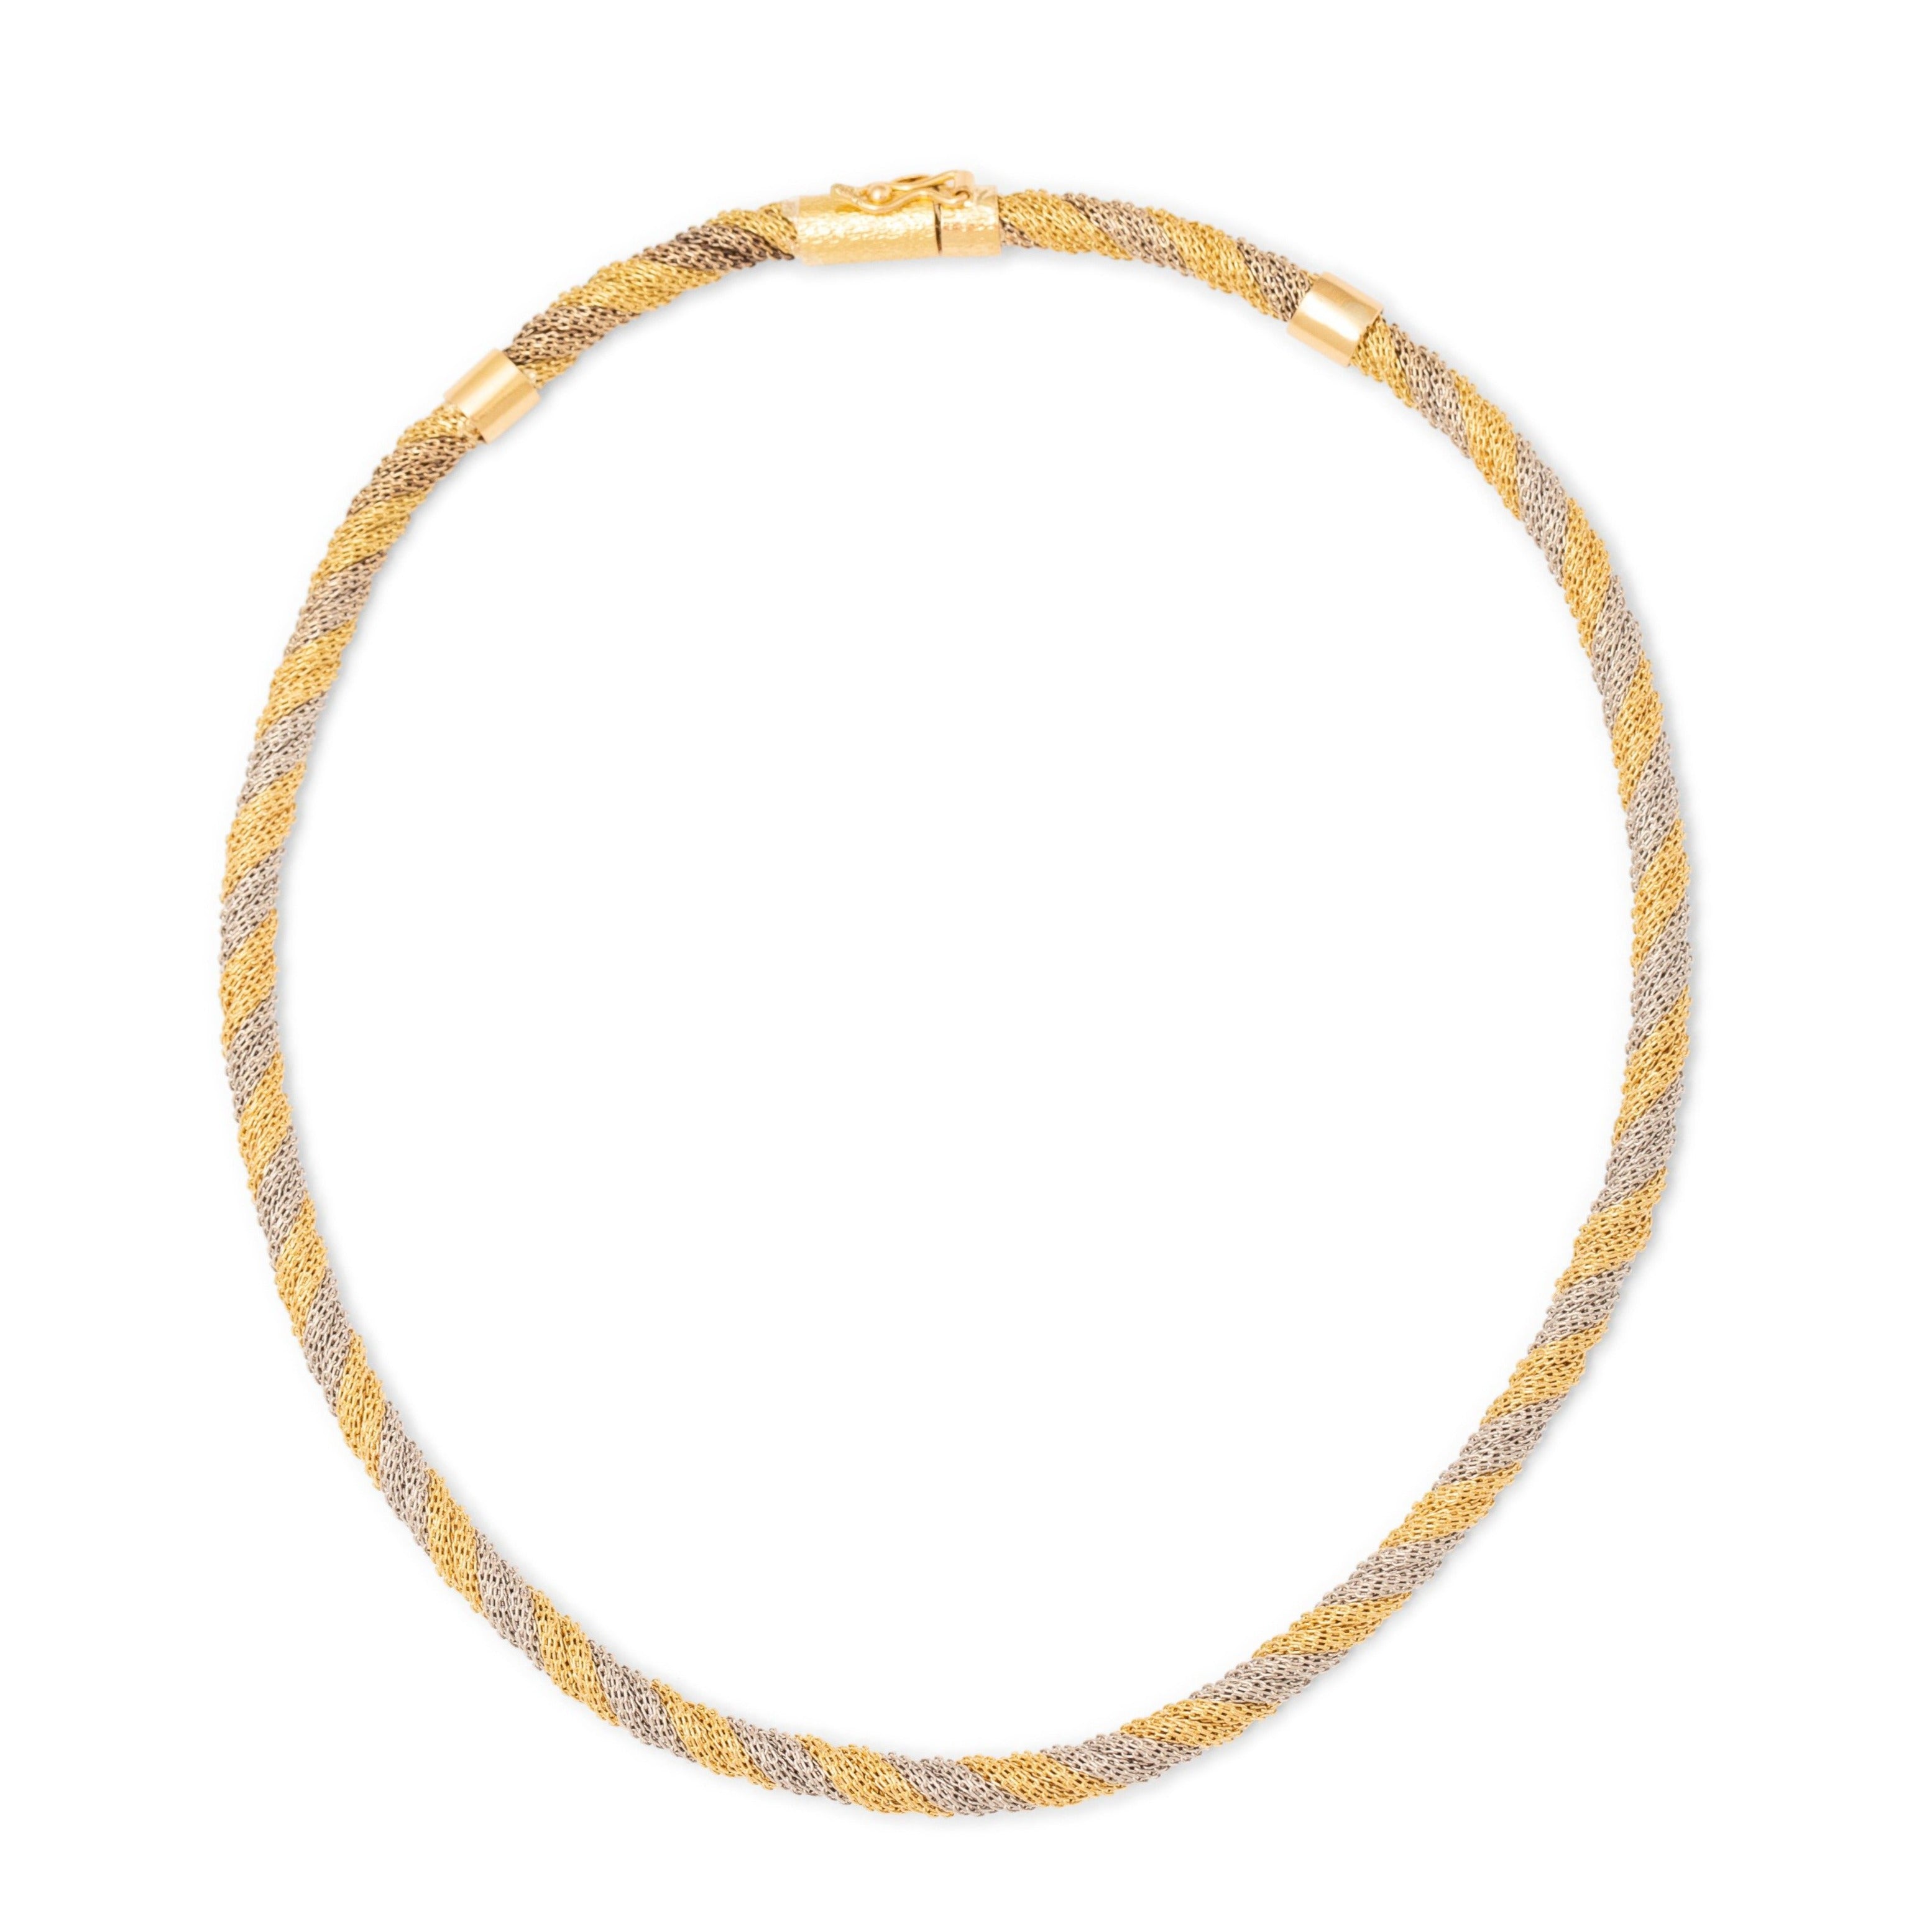 Two-Tone Twisted Yellow and White 18K Gold Choker 14" Necklace